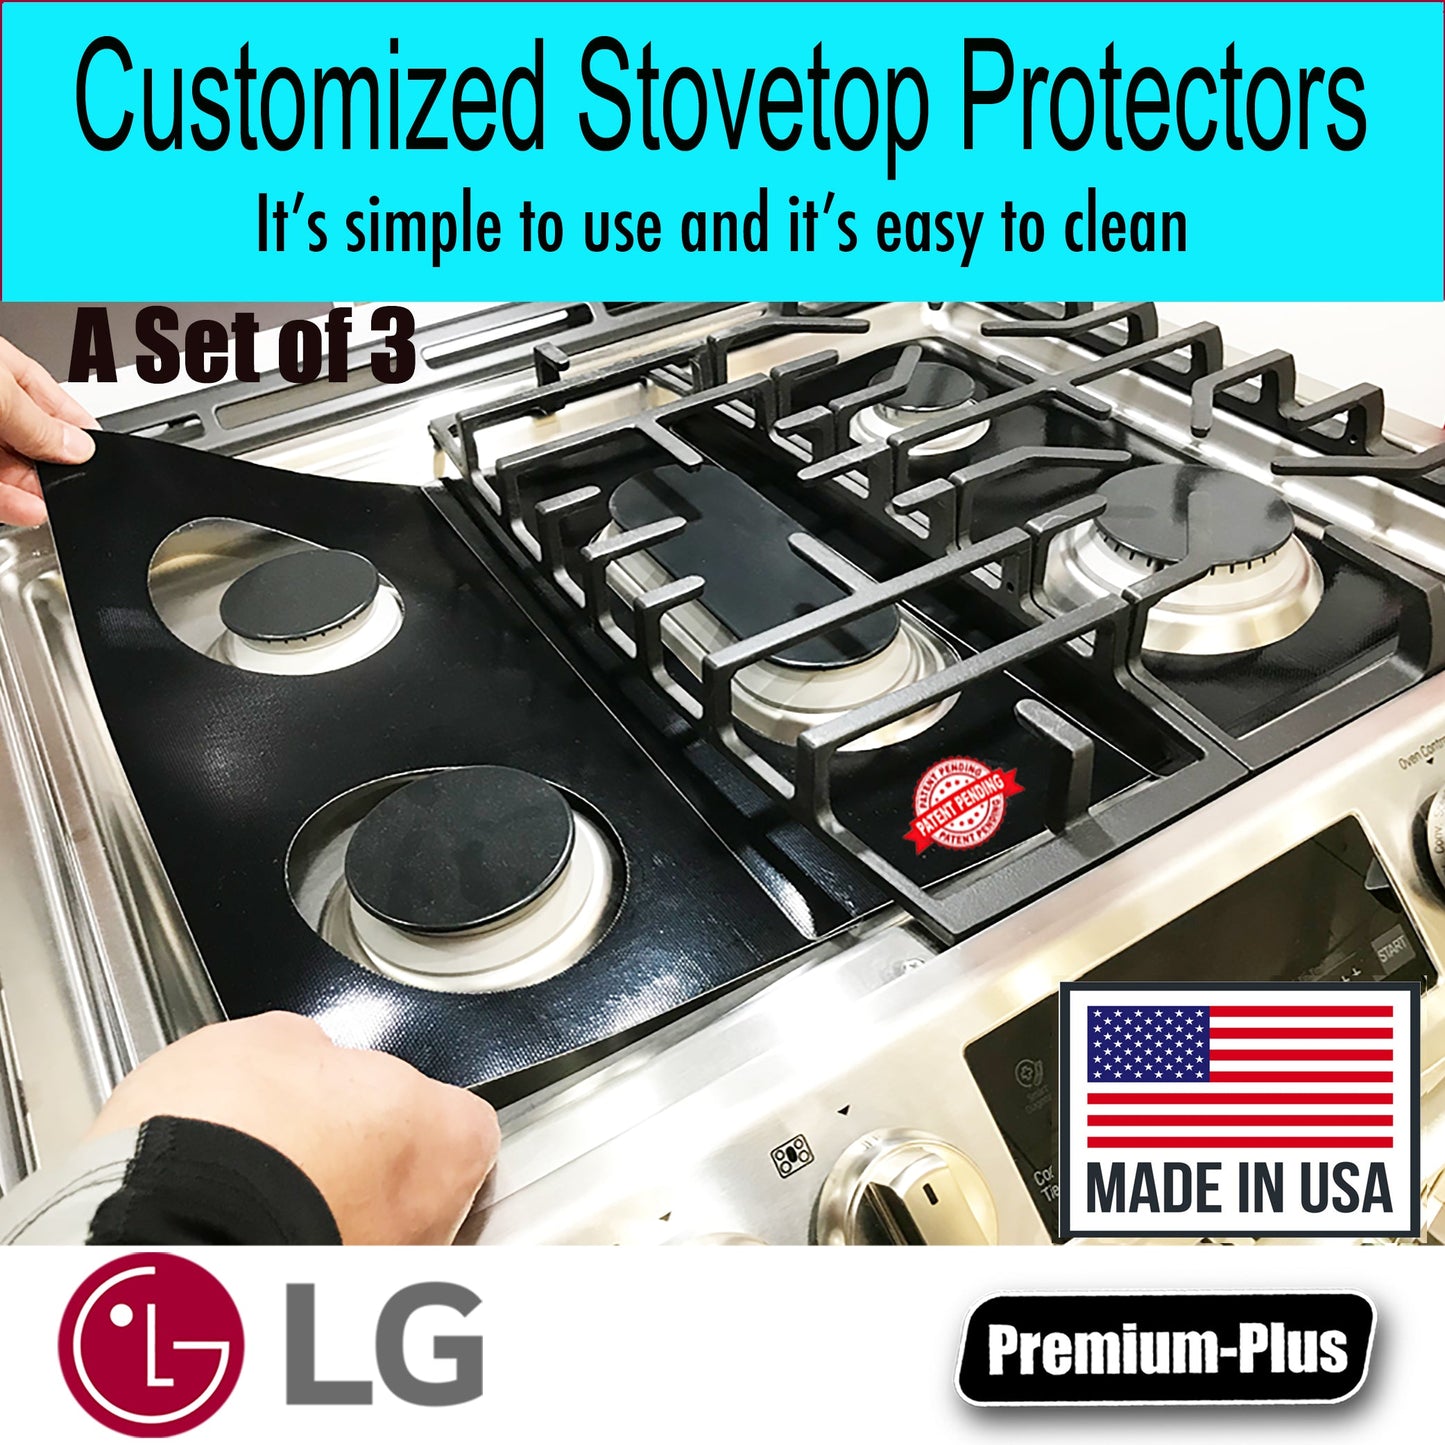 LG Stove Protector Liners For LG Gas Ranges-(FREE SHIPPING)